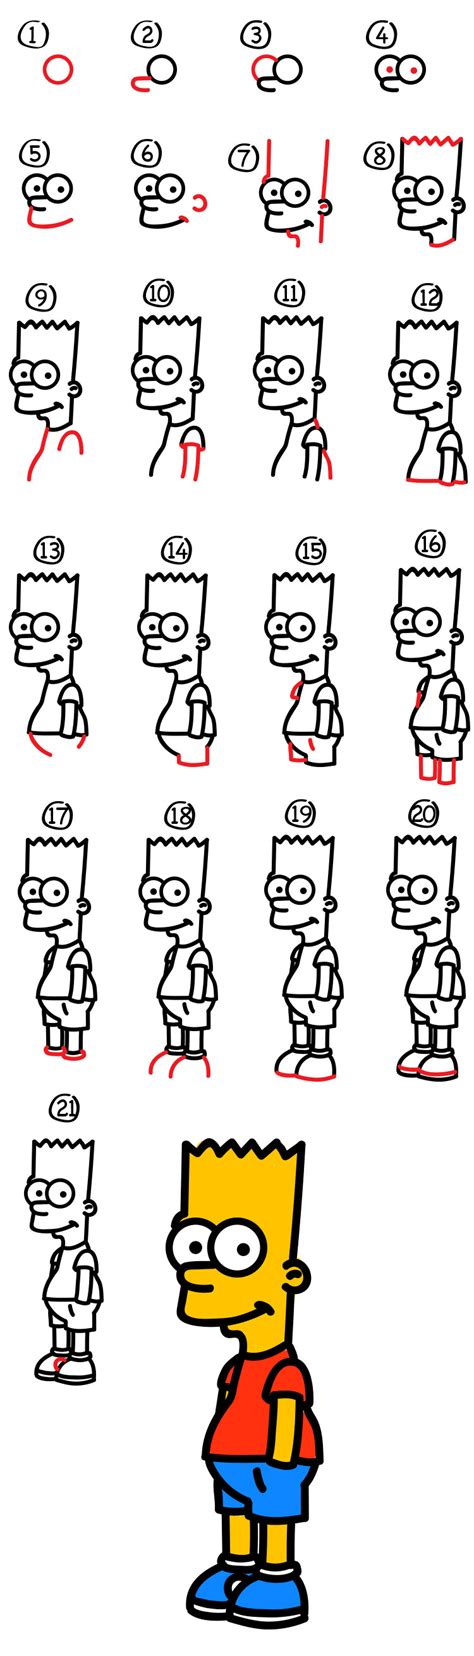 Even some younger children might be able to draw bart simpson if you stand by to help with the. How To Draw Bart Simpson - Art For Kids Hub